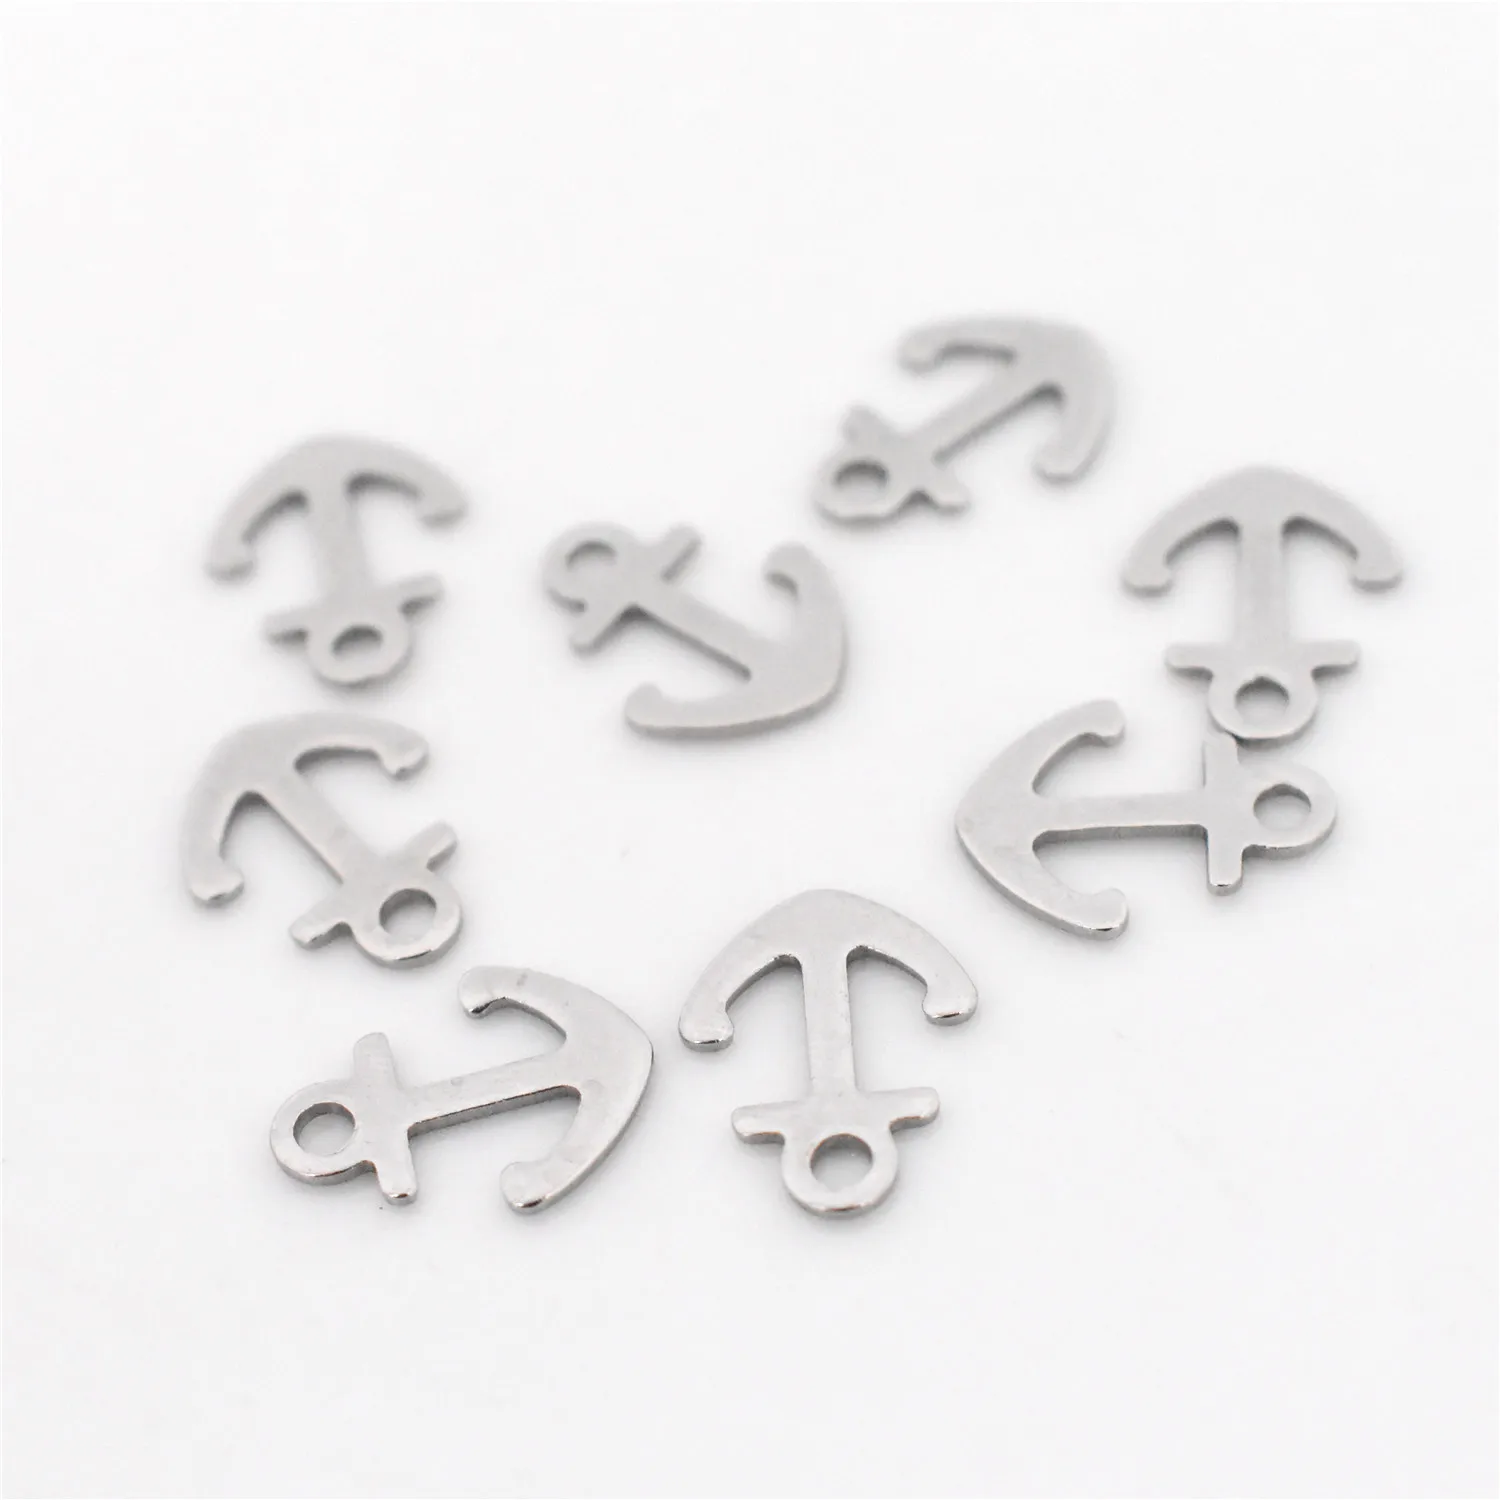 50pcs/lot 13.6x10.5mm Stainless Steel Material Anchor Charms Pendant DIY Handmade Necklace and Earring Jewelry Accessories | Украшения и